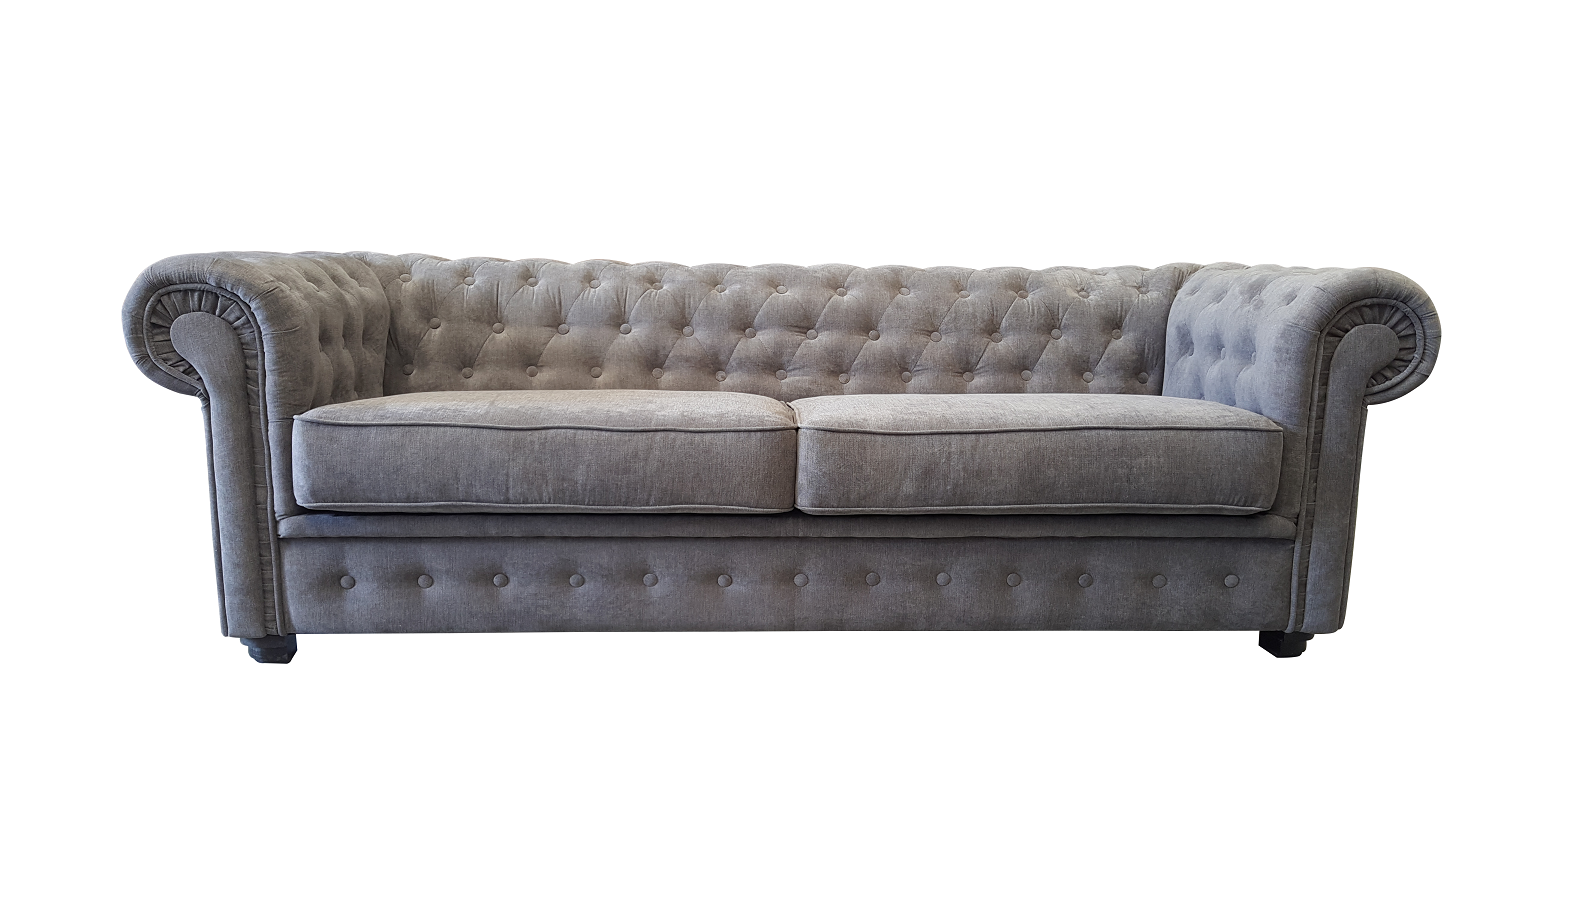 Sofa bed-Imperial